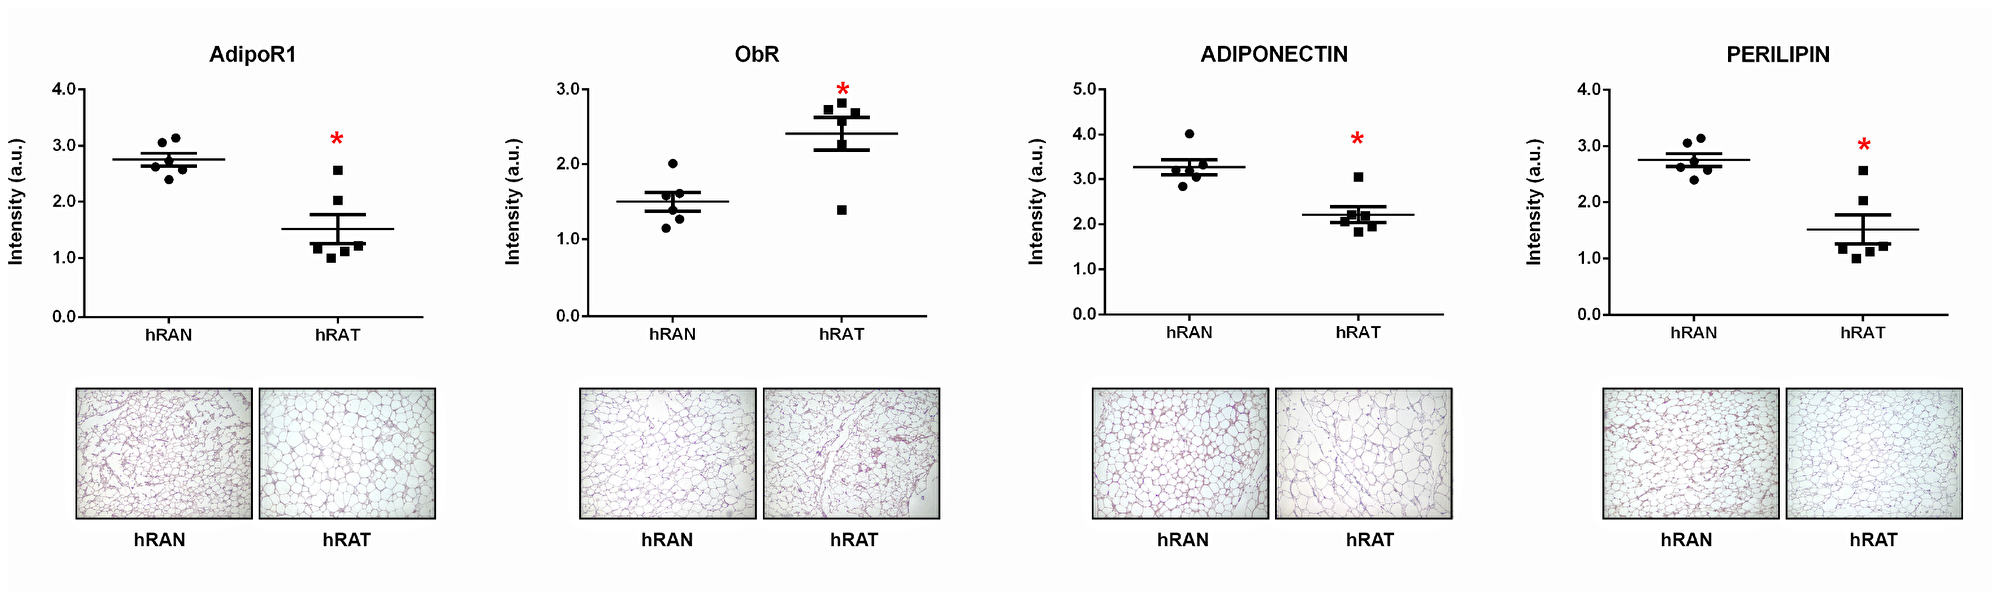 ObR, AdipoR1, adiponectin and perilipin 1 expression in the different adipose tissues.